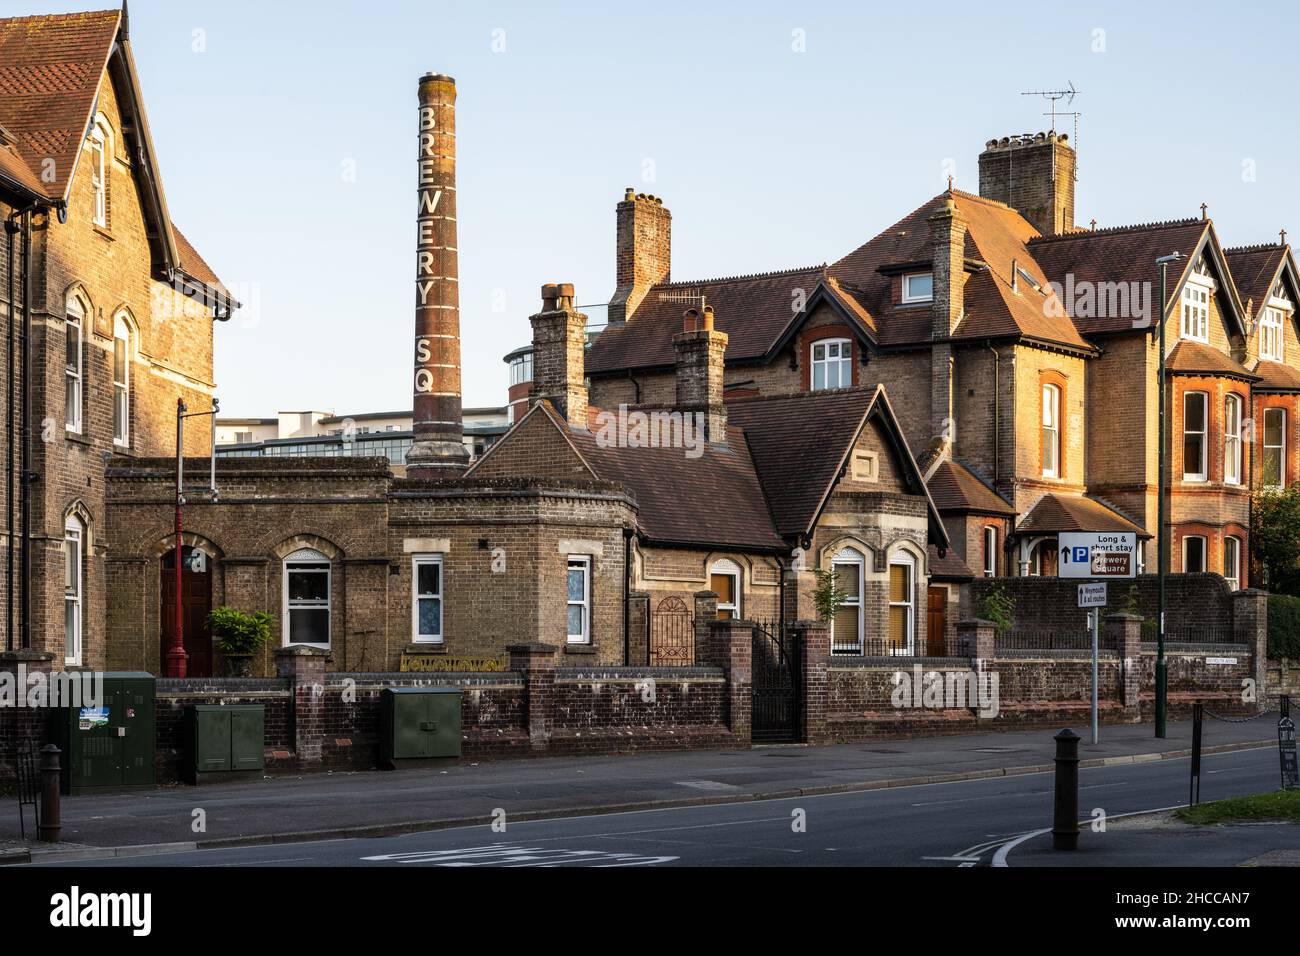 The old industrial chimney of Brewery Square rises above houses in Dorchester, Dorset. Stock Photo